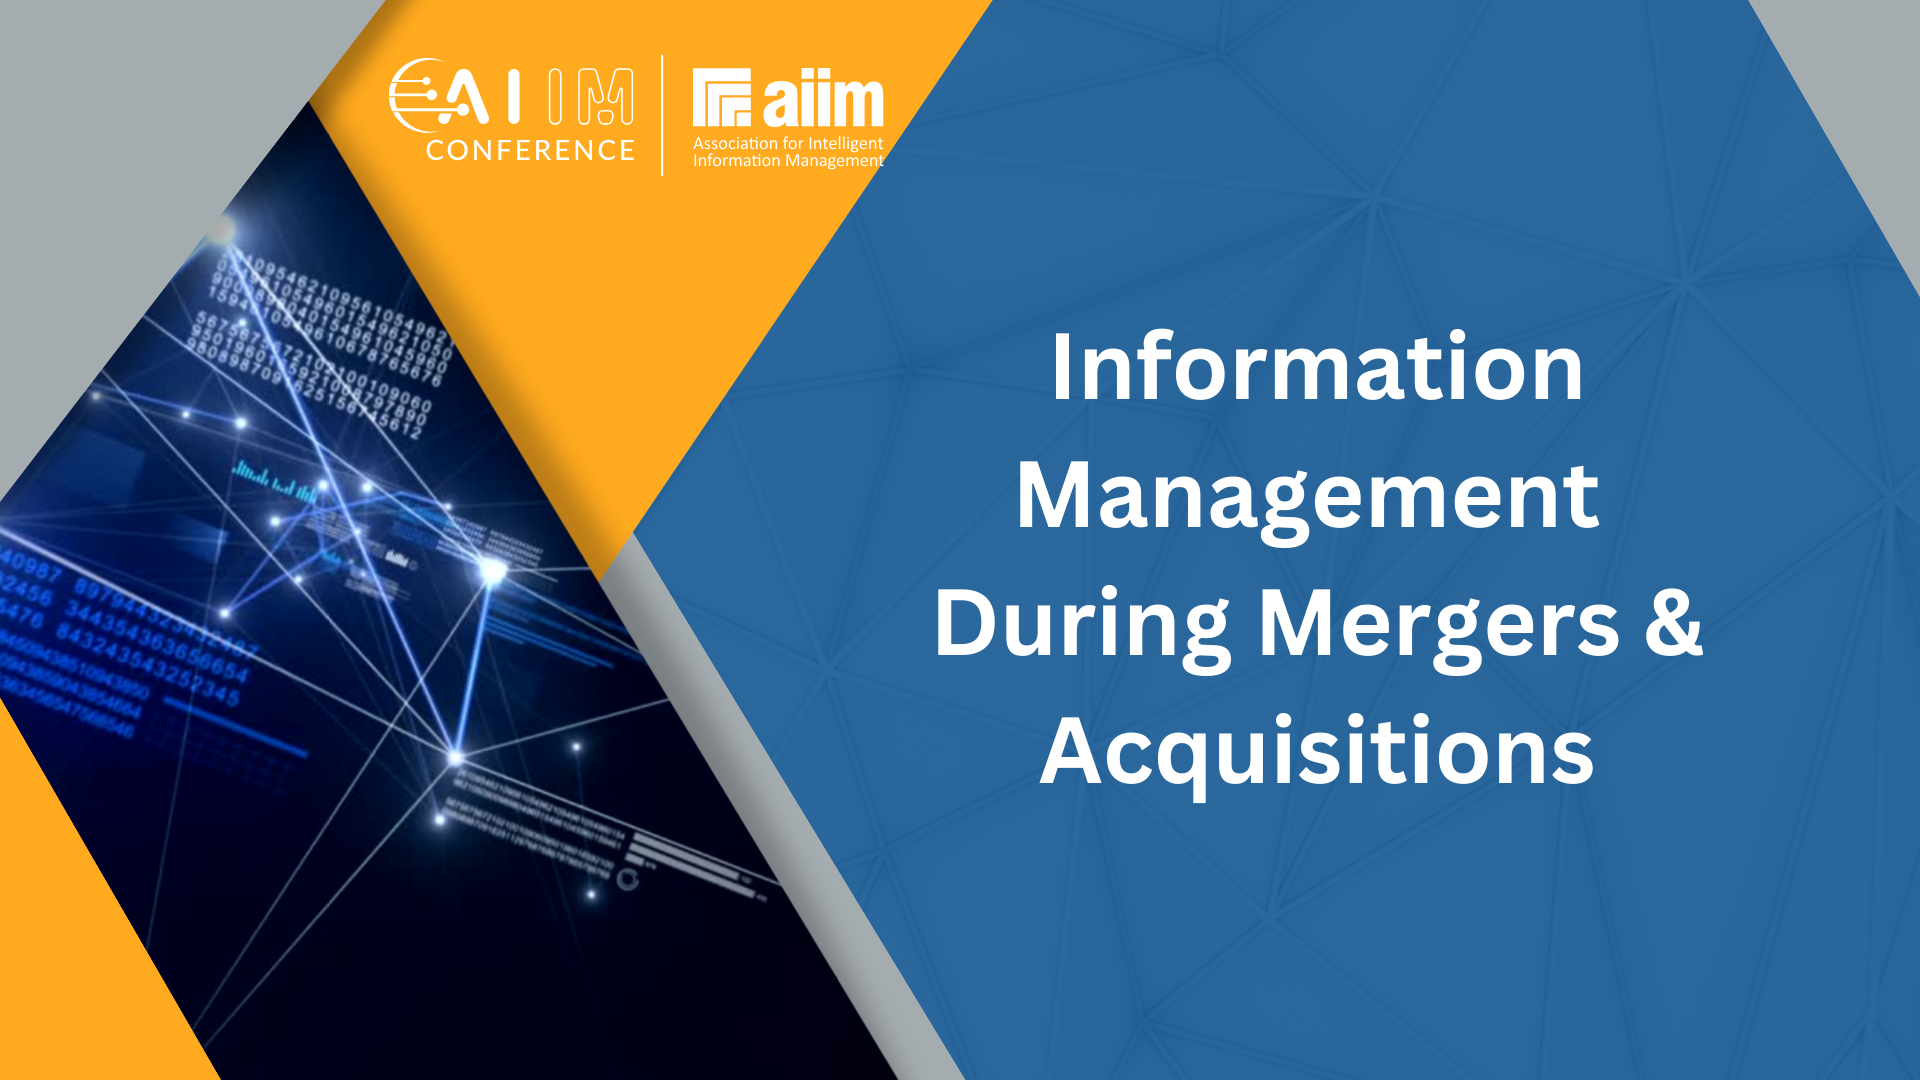 Information Management During Mergers & Acquisitions